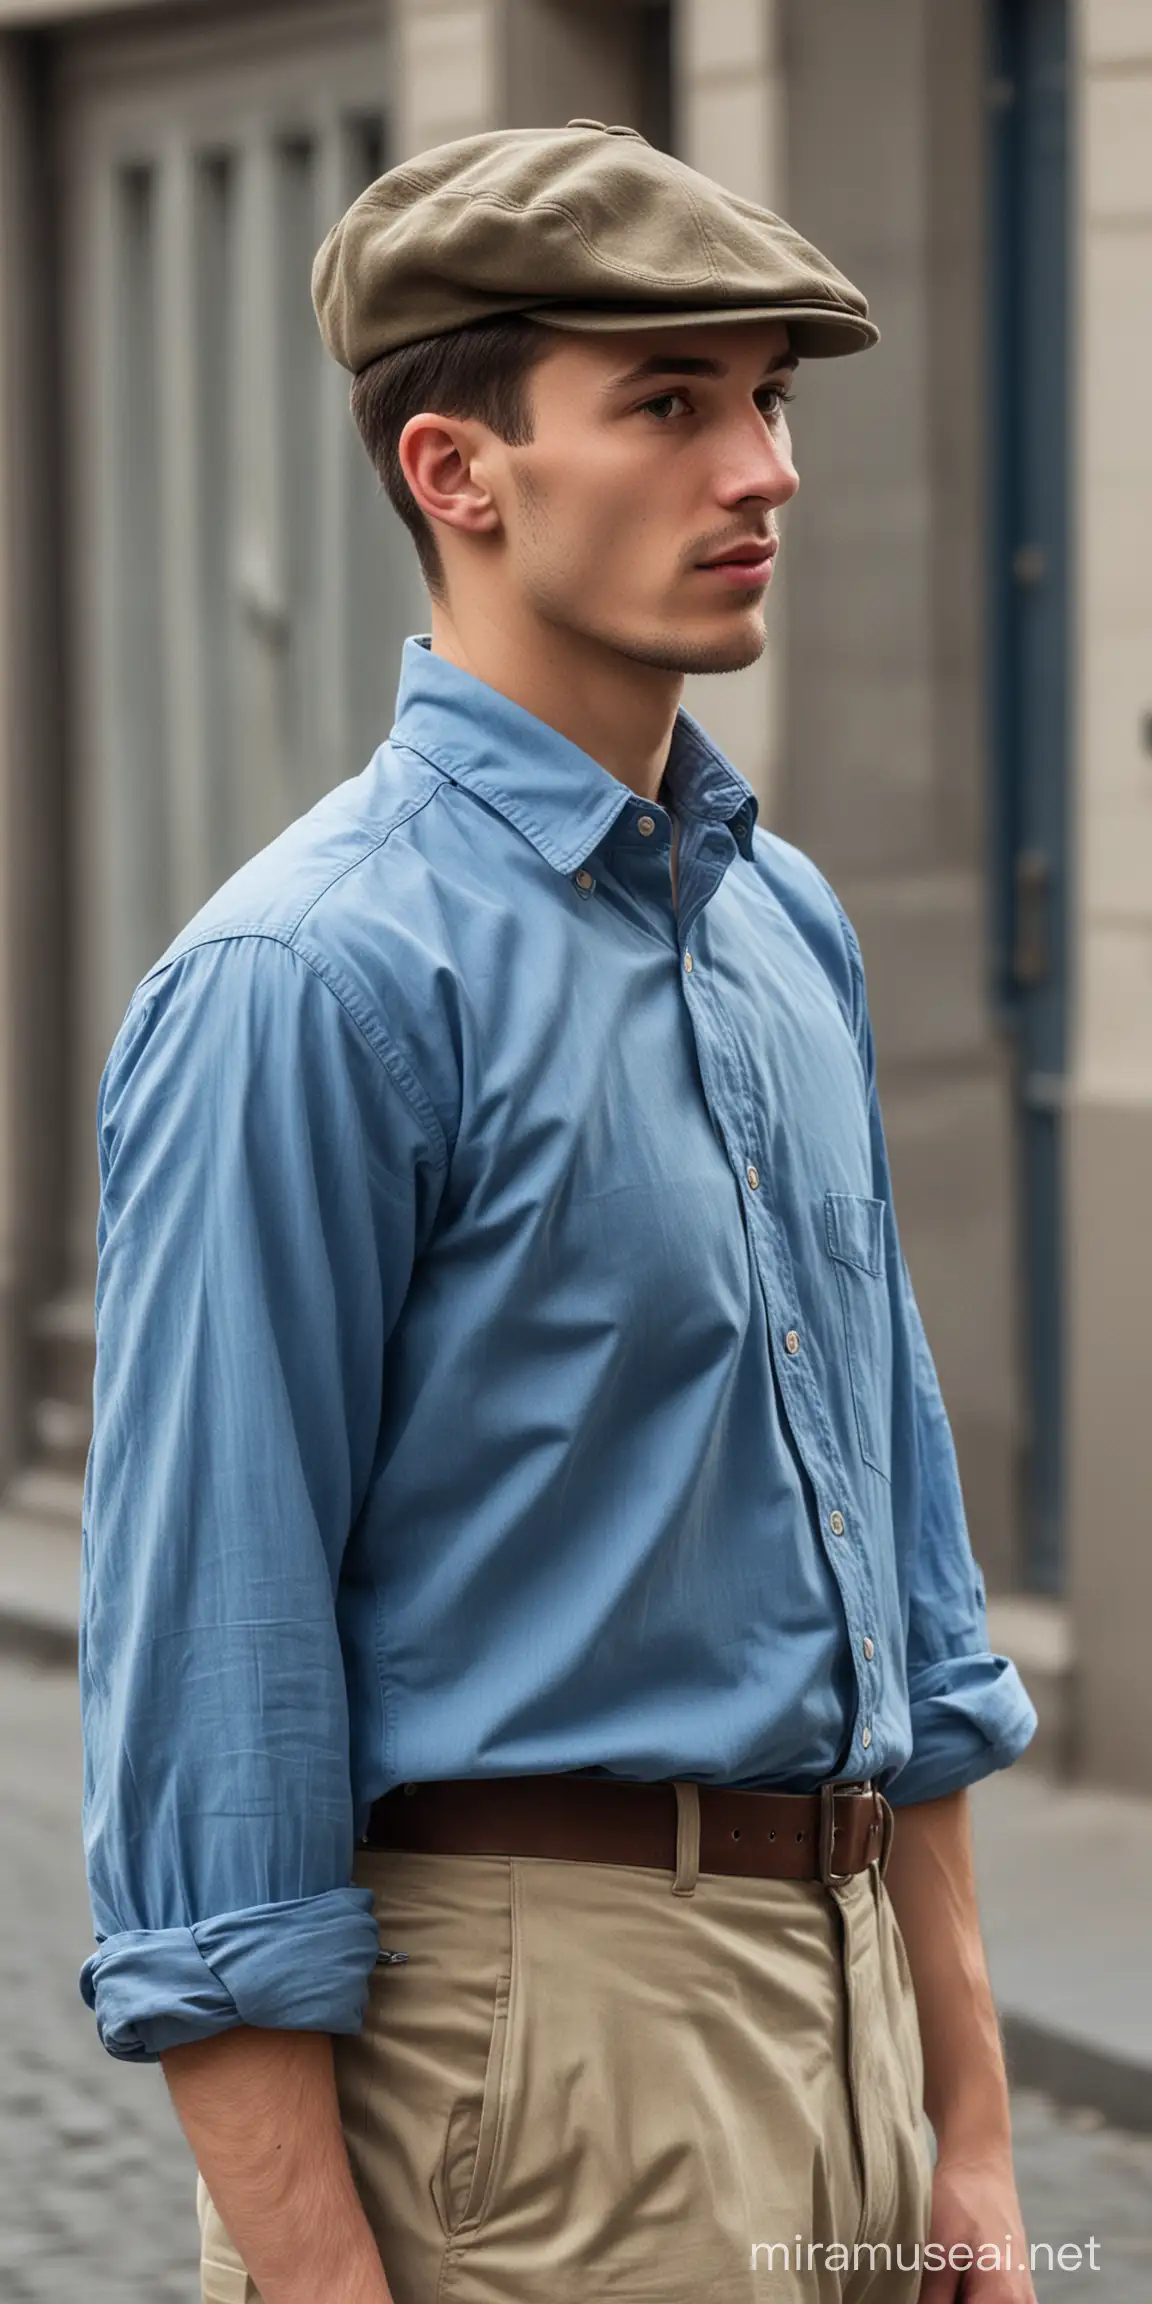 a colorful photo of 20yo man partisan wearing blue classic shirt and a hat standing backward oriented on the street in Warsaw during World War II focal length 300 mm